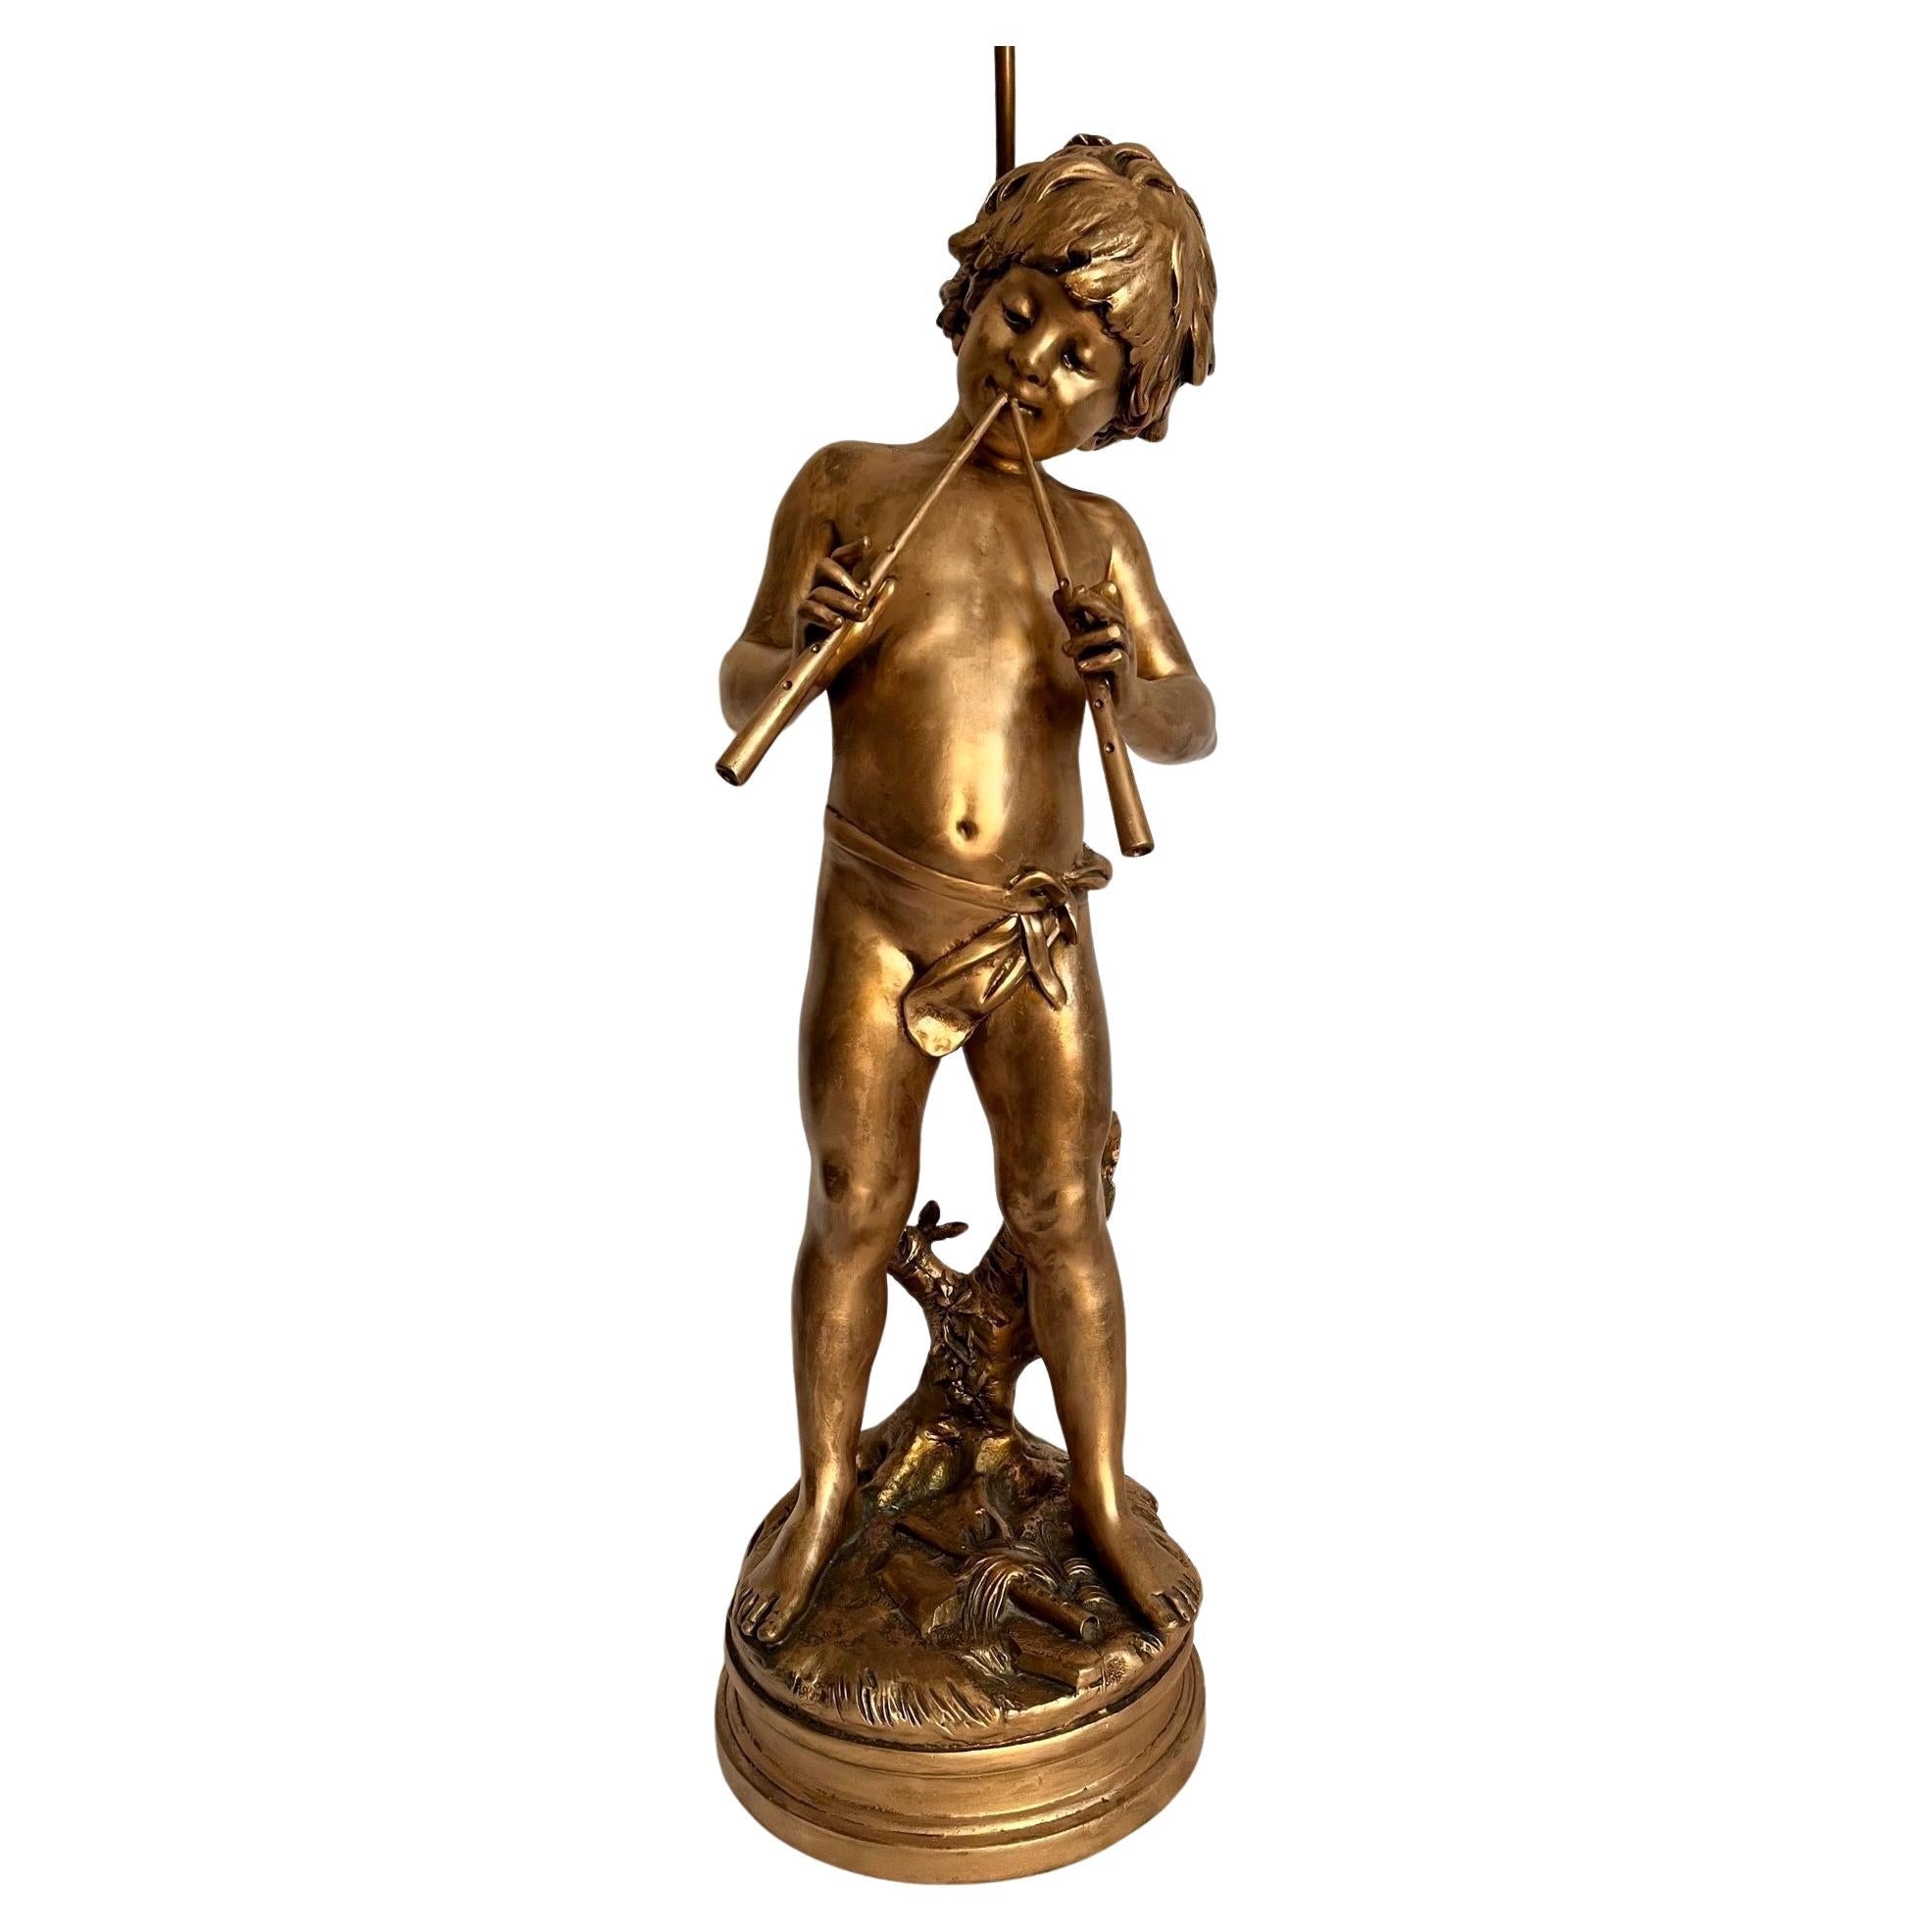 19th Century French Gilt Bronzed Lamp Sculpture “Boy with Flute”, Signed Moreau. For Sale